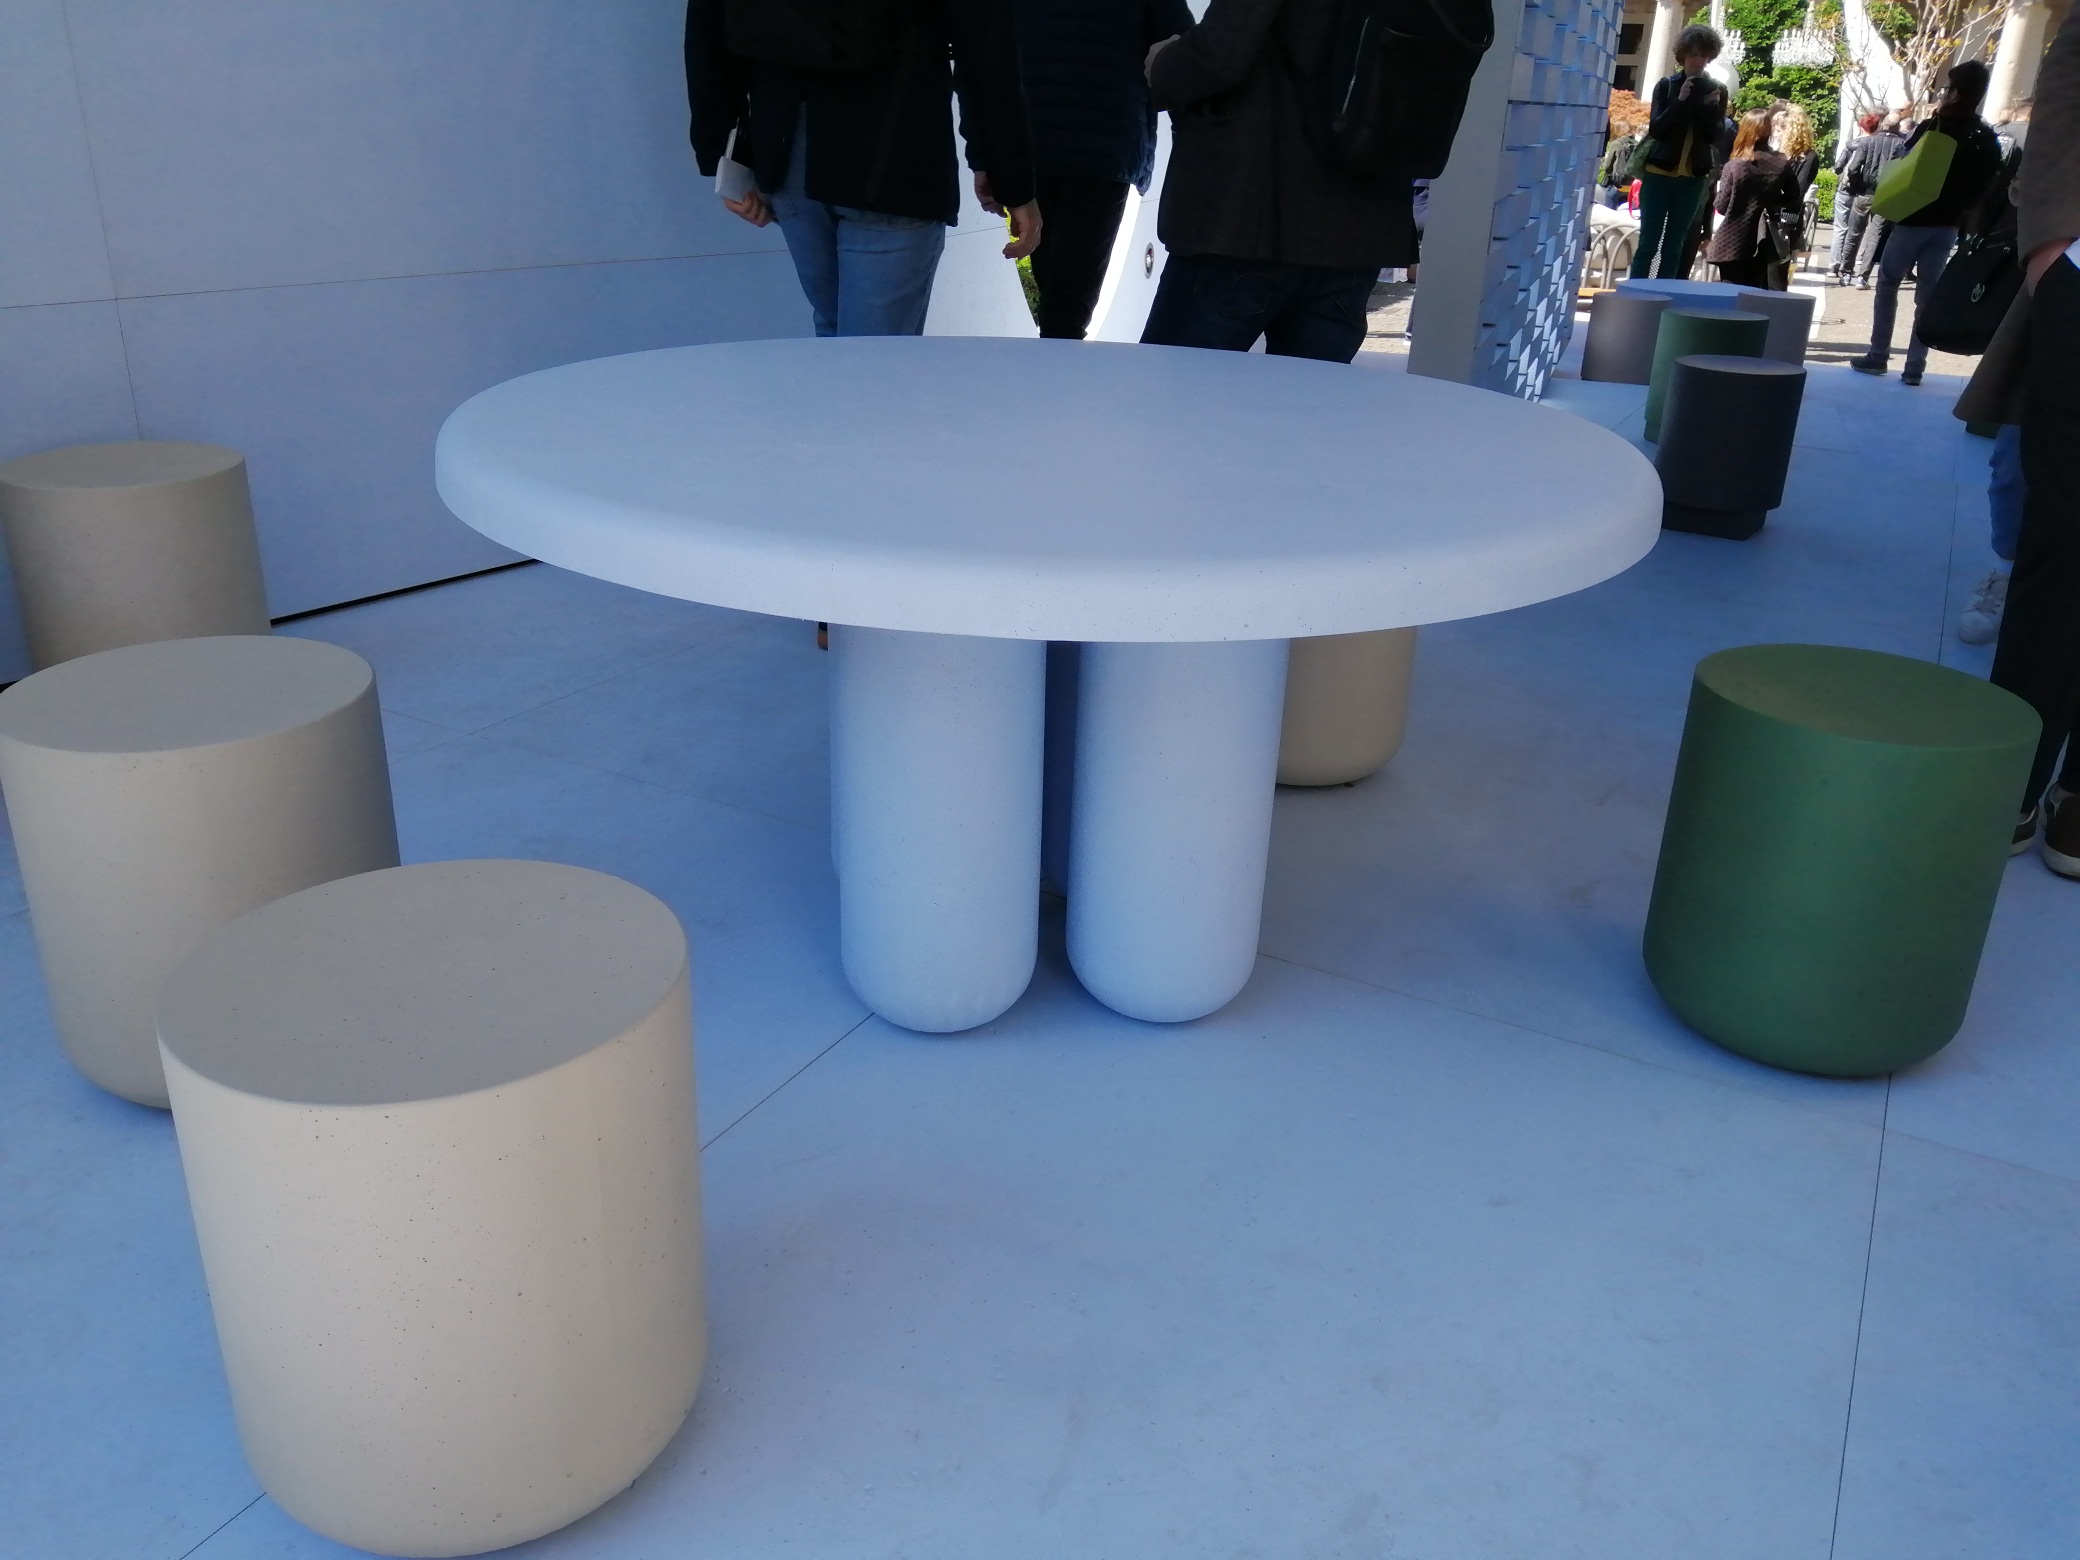 D-ICON at the 2019 Milan Furniture Exhibition